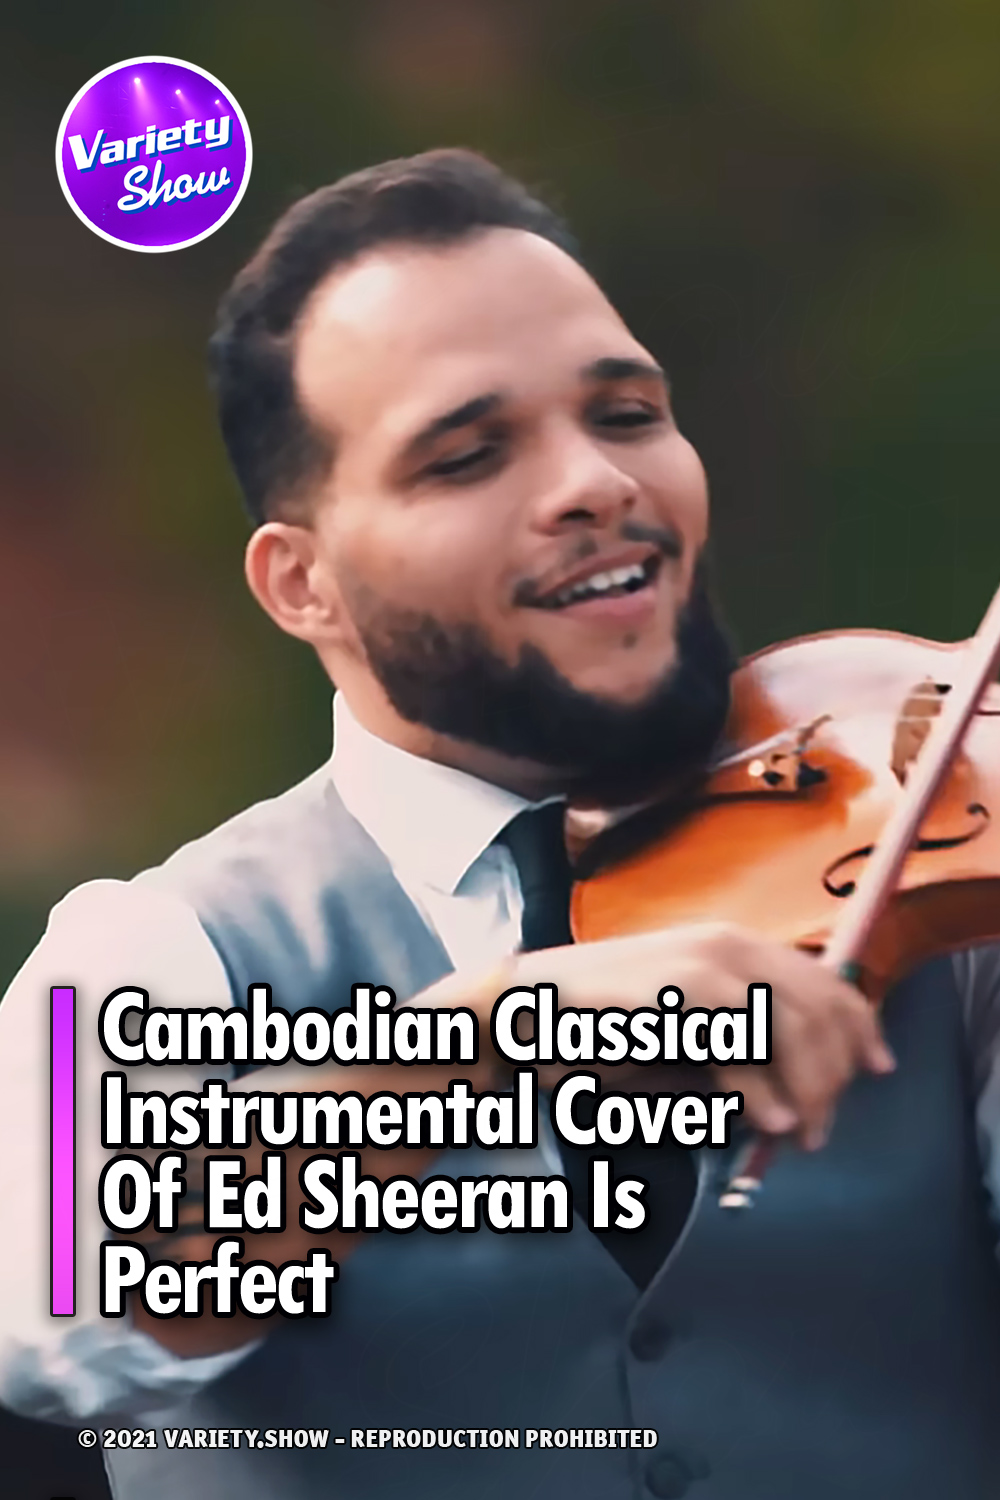 Cambodian Classical Instrumental Cover Of Ed Sheeran Is Perfect